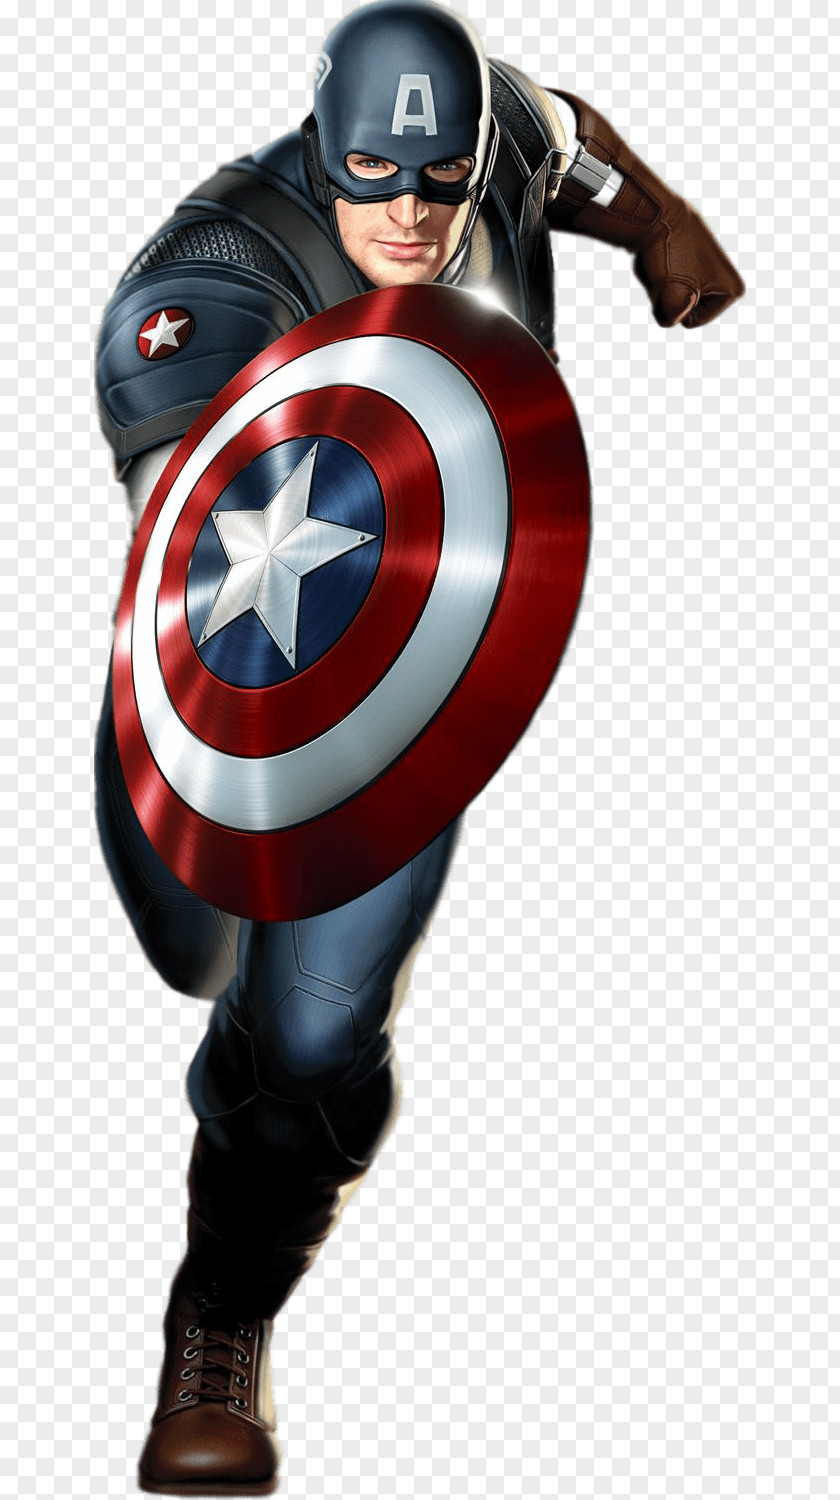 Captain America America: The First Avenger Marvel Comics Image PNG